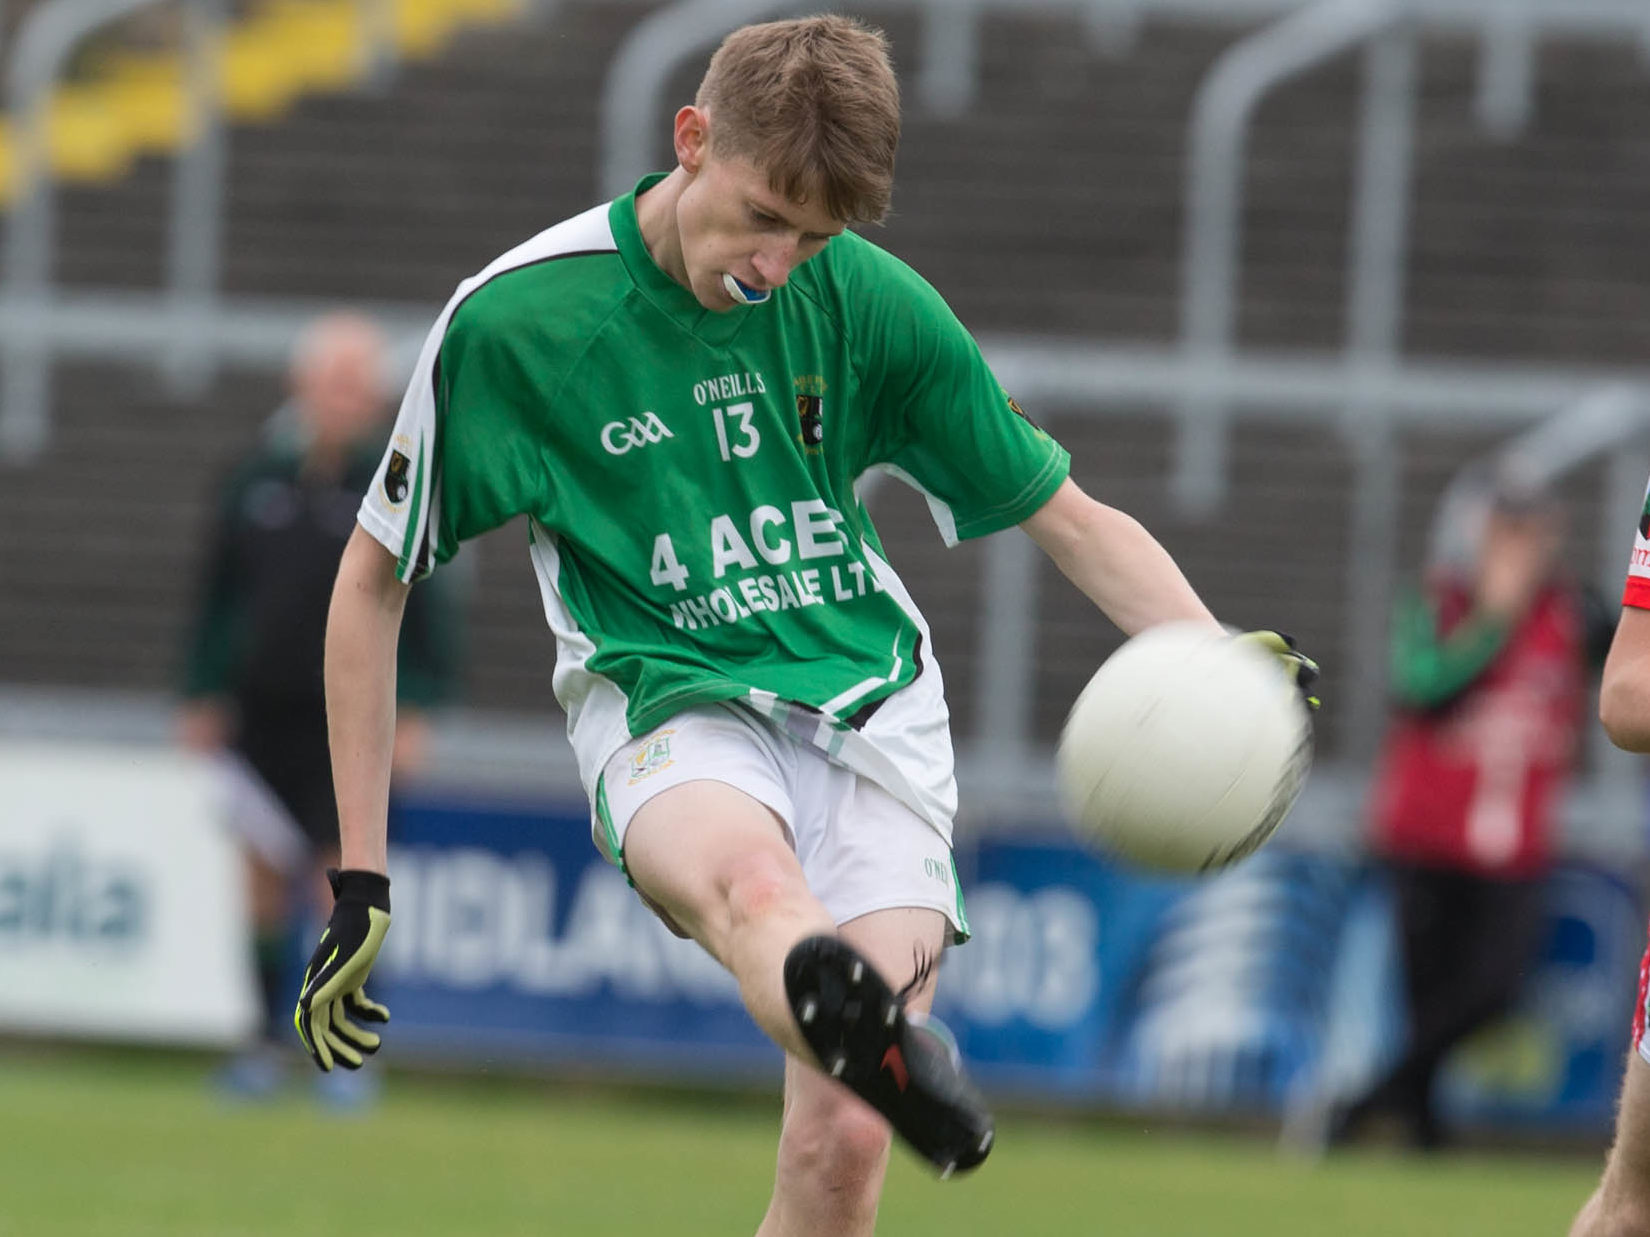 Sean Moore was excellent for Ballyfin this afternoon